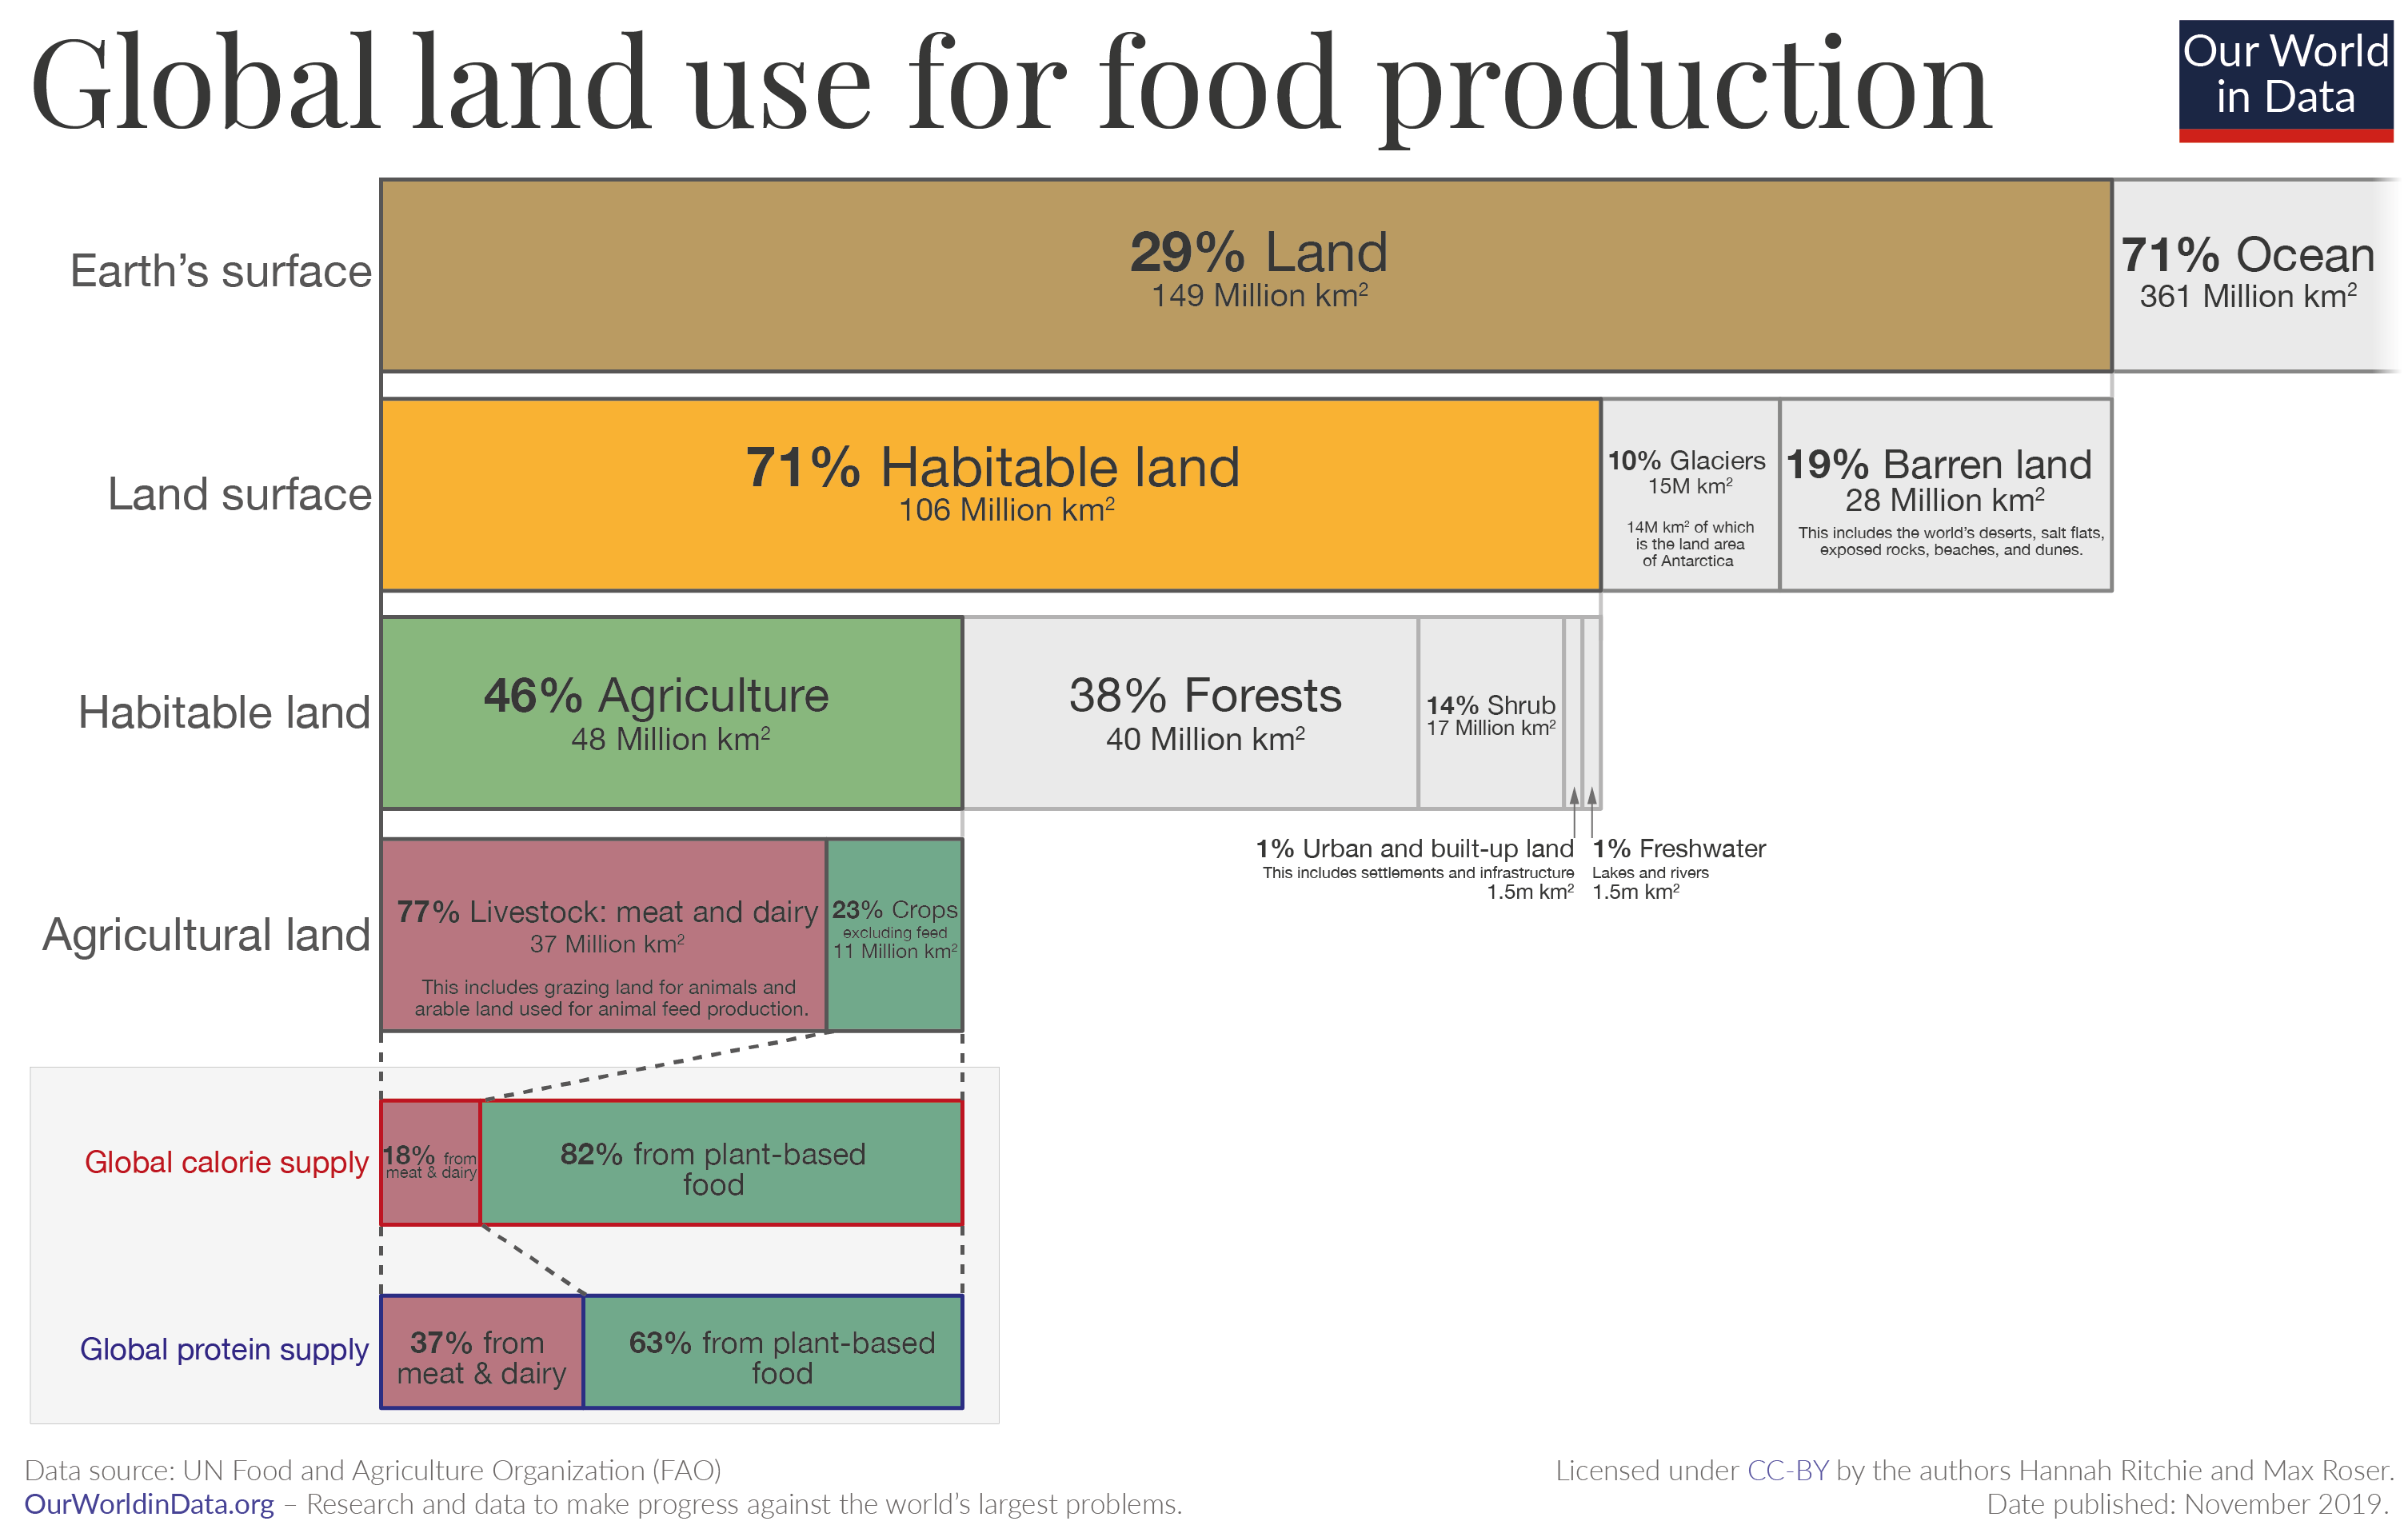 46% of habitable land-use is taken by agriculture